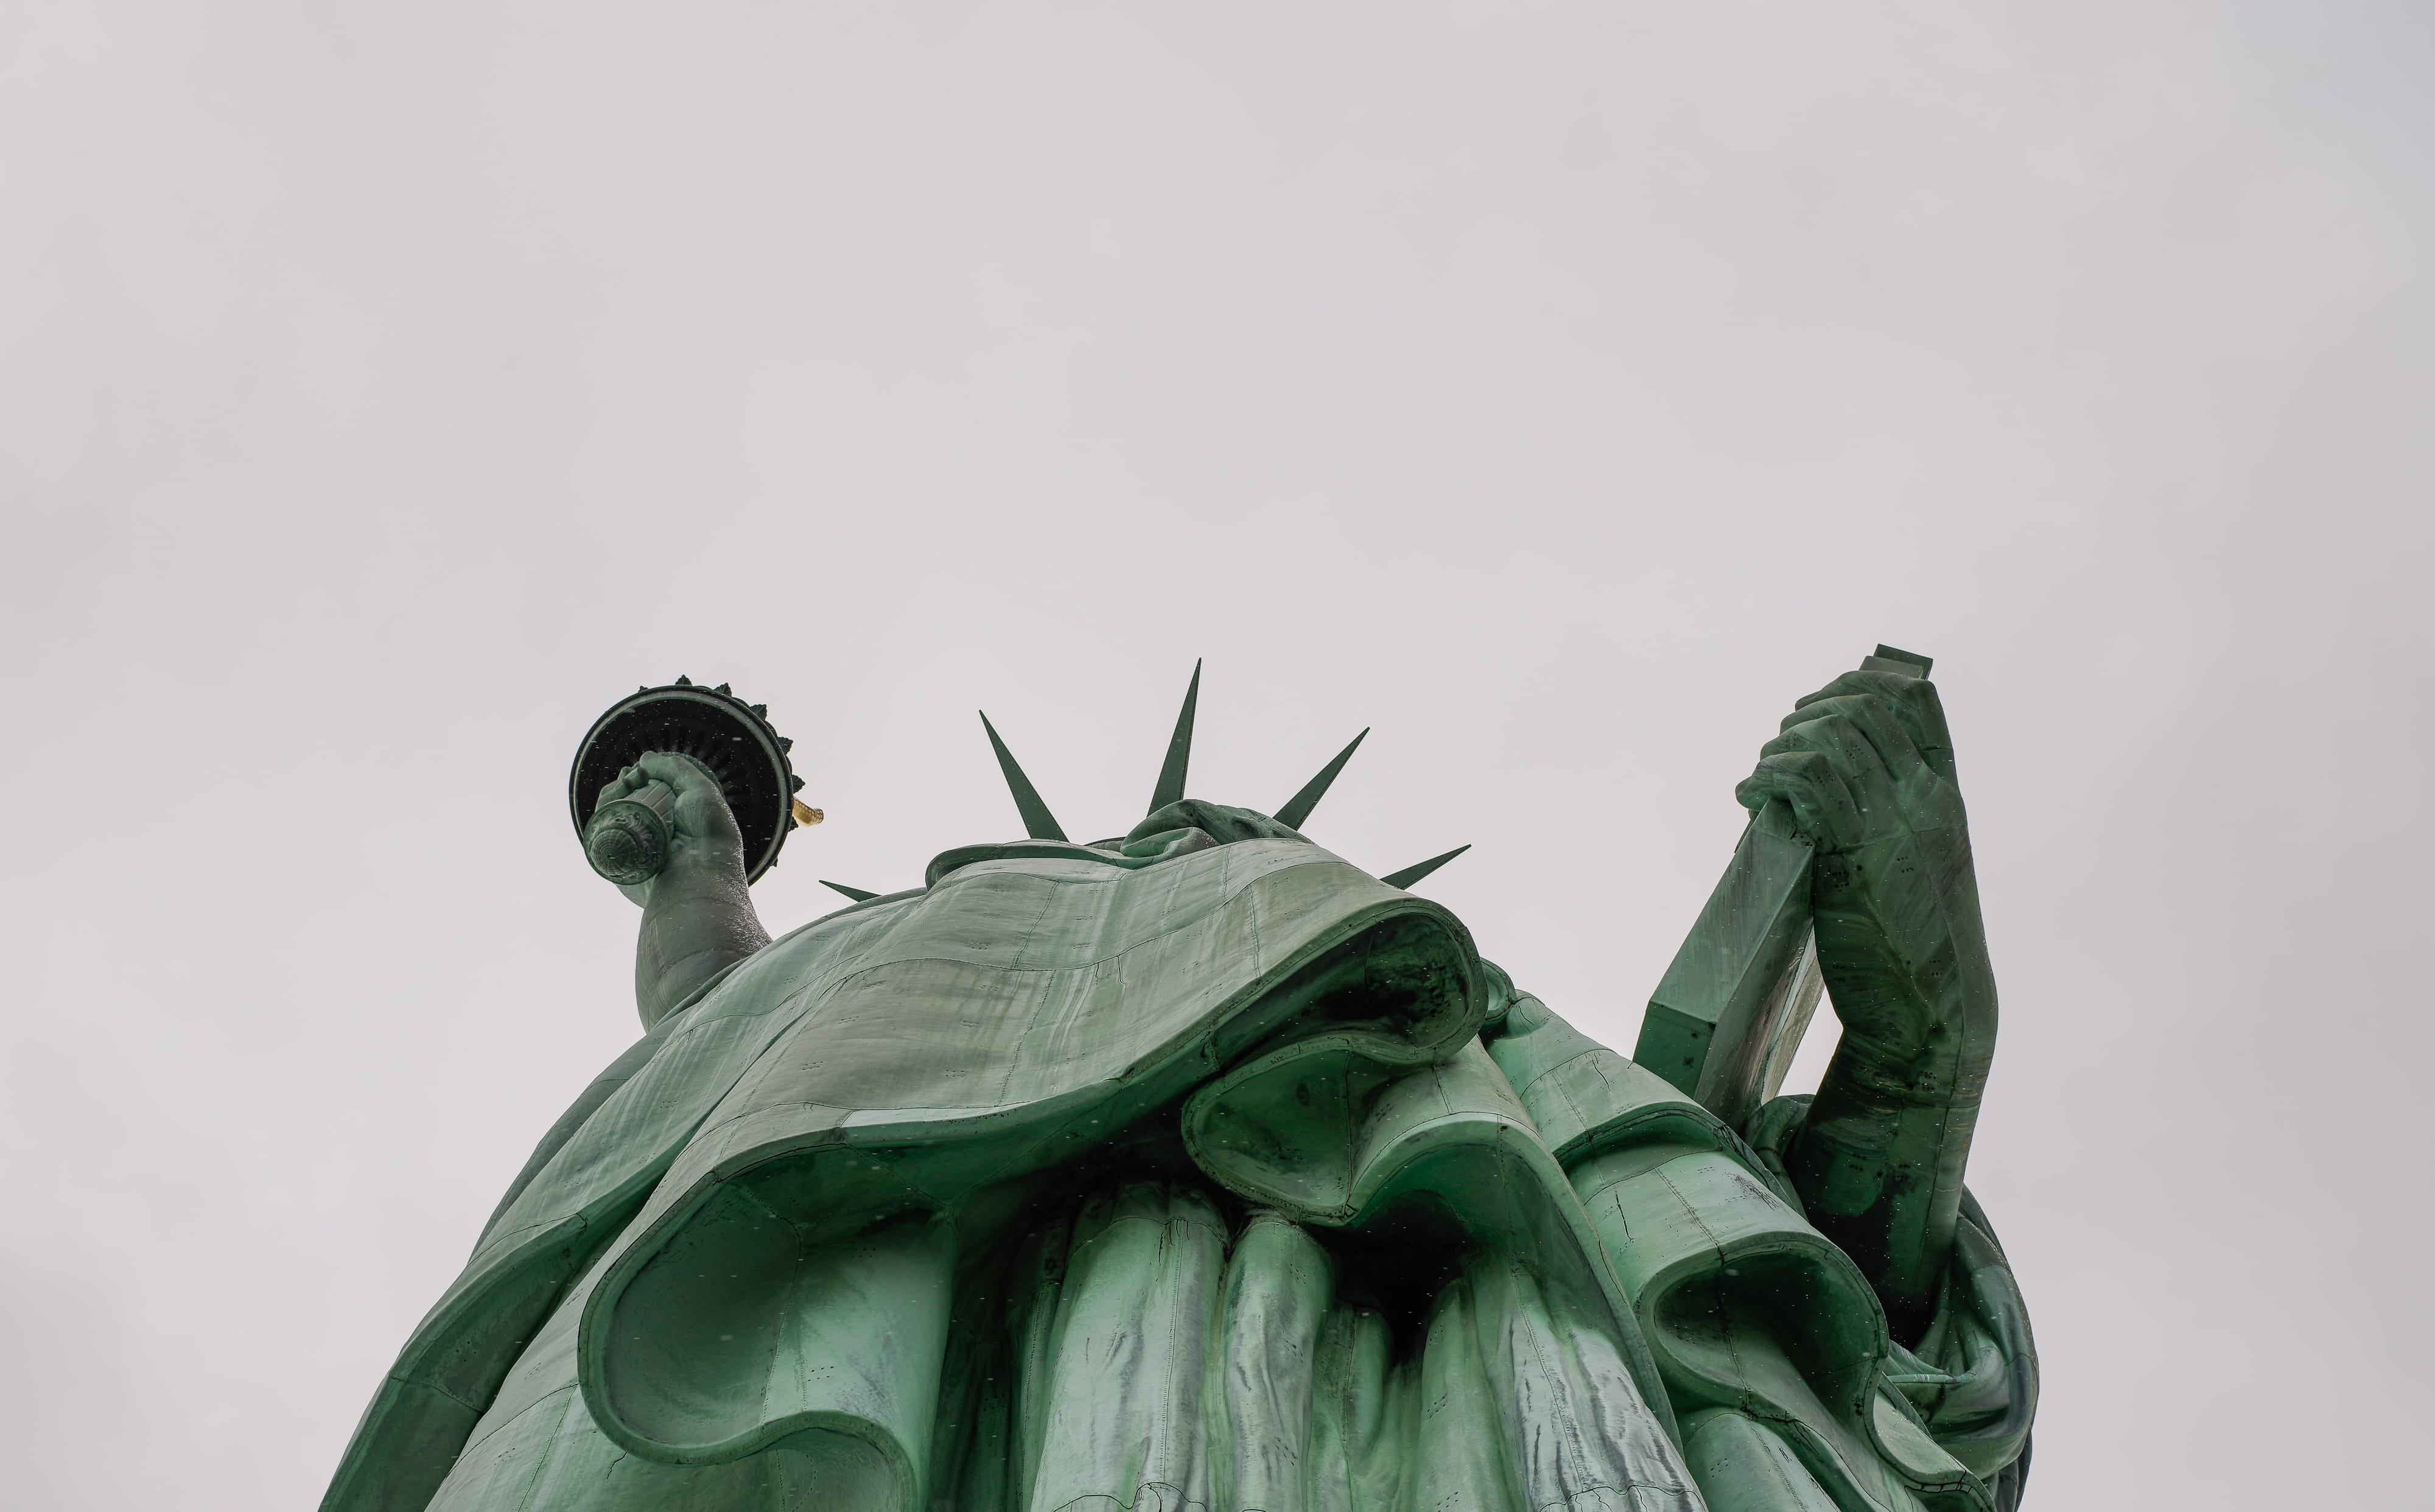 low angle photography of Statue of Liberty, New York, worm's eye view of Statue of Liberty